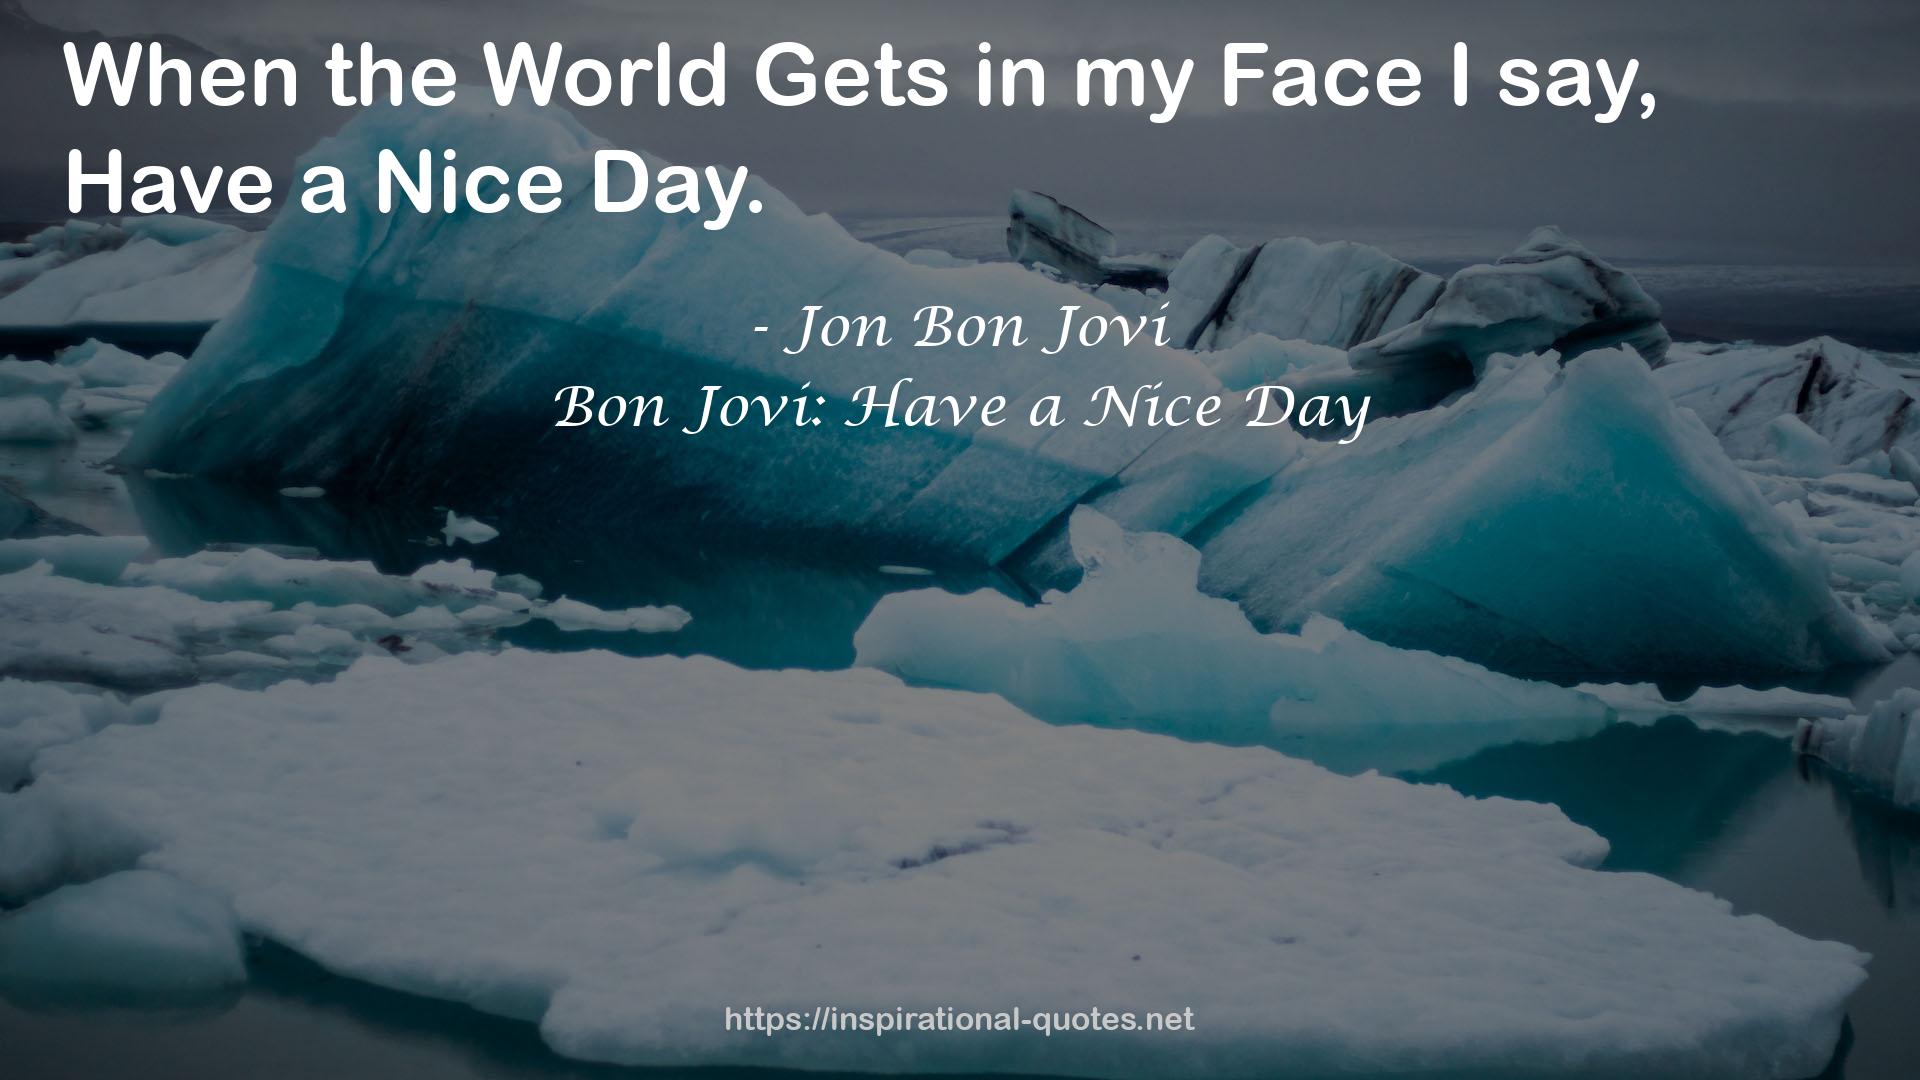 Bon Jovi: Have a Nice Day QUOTES